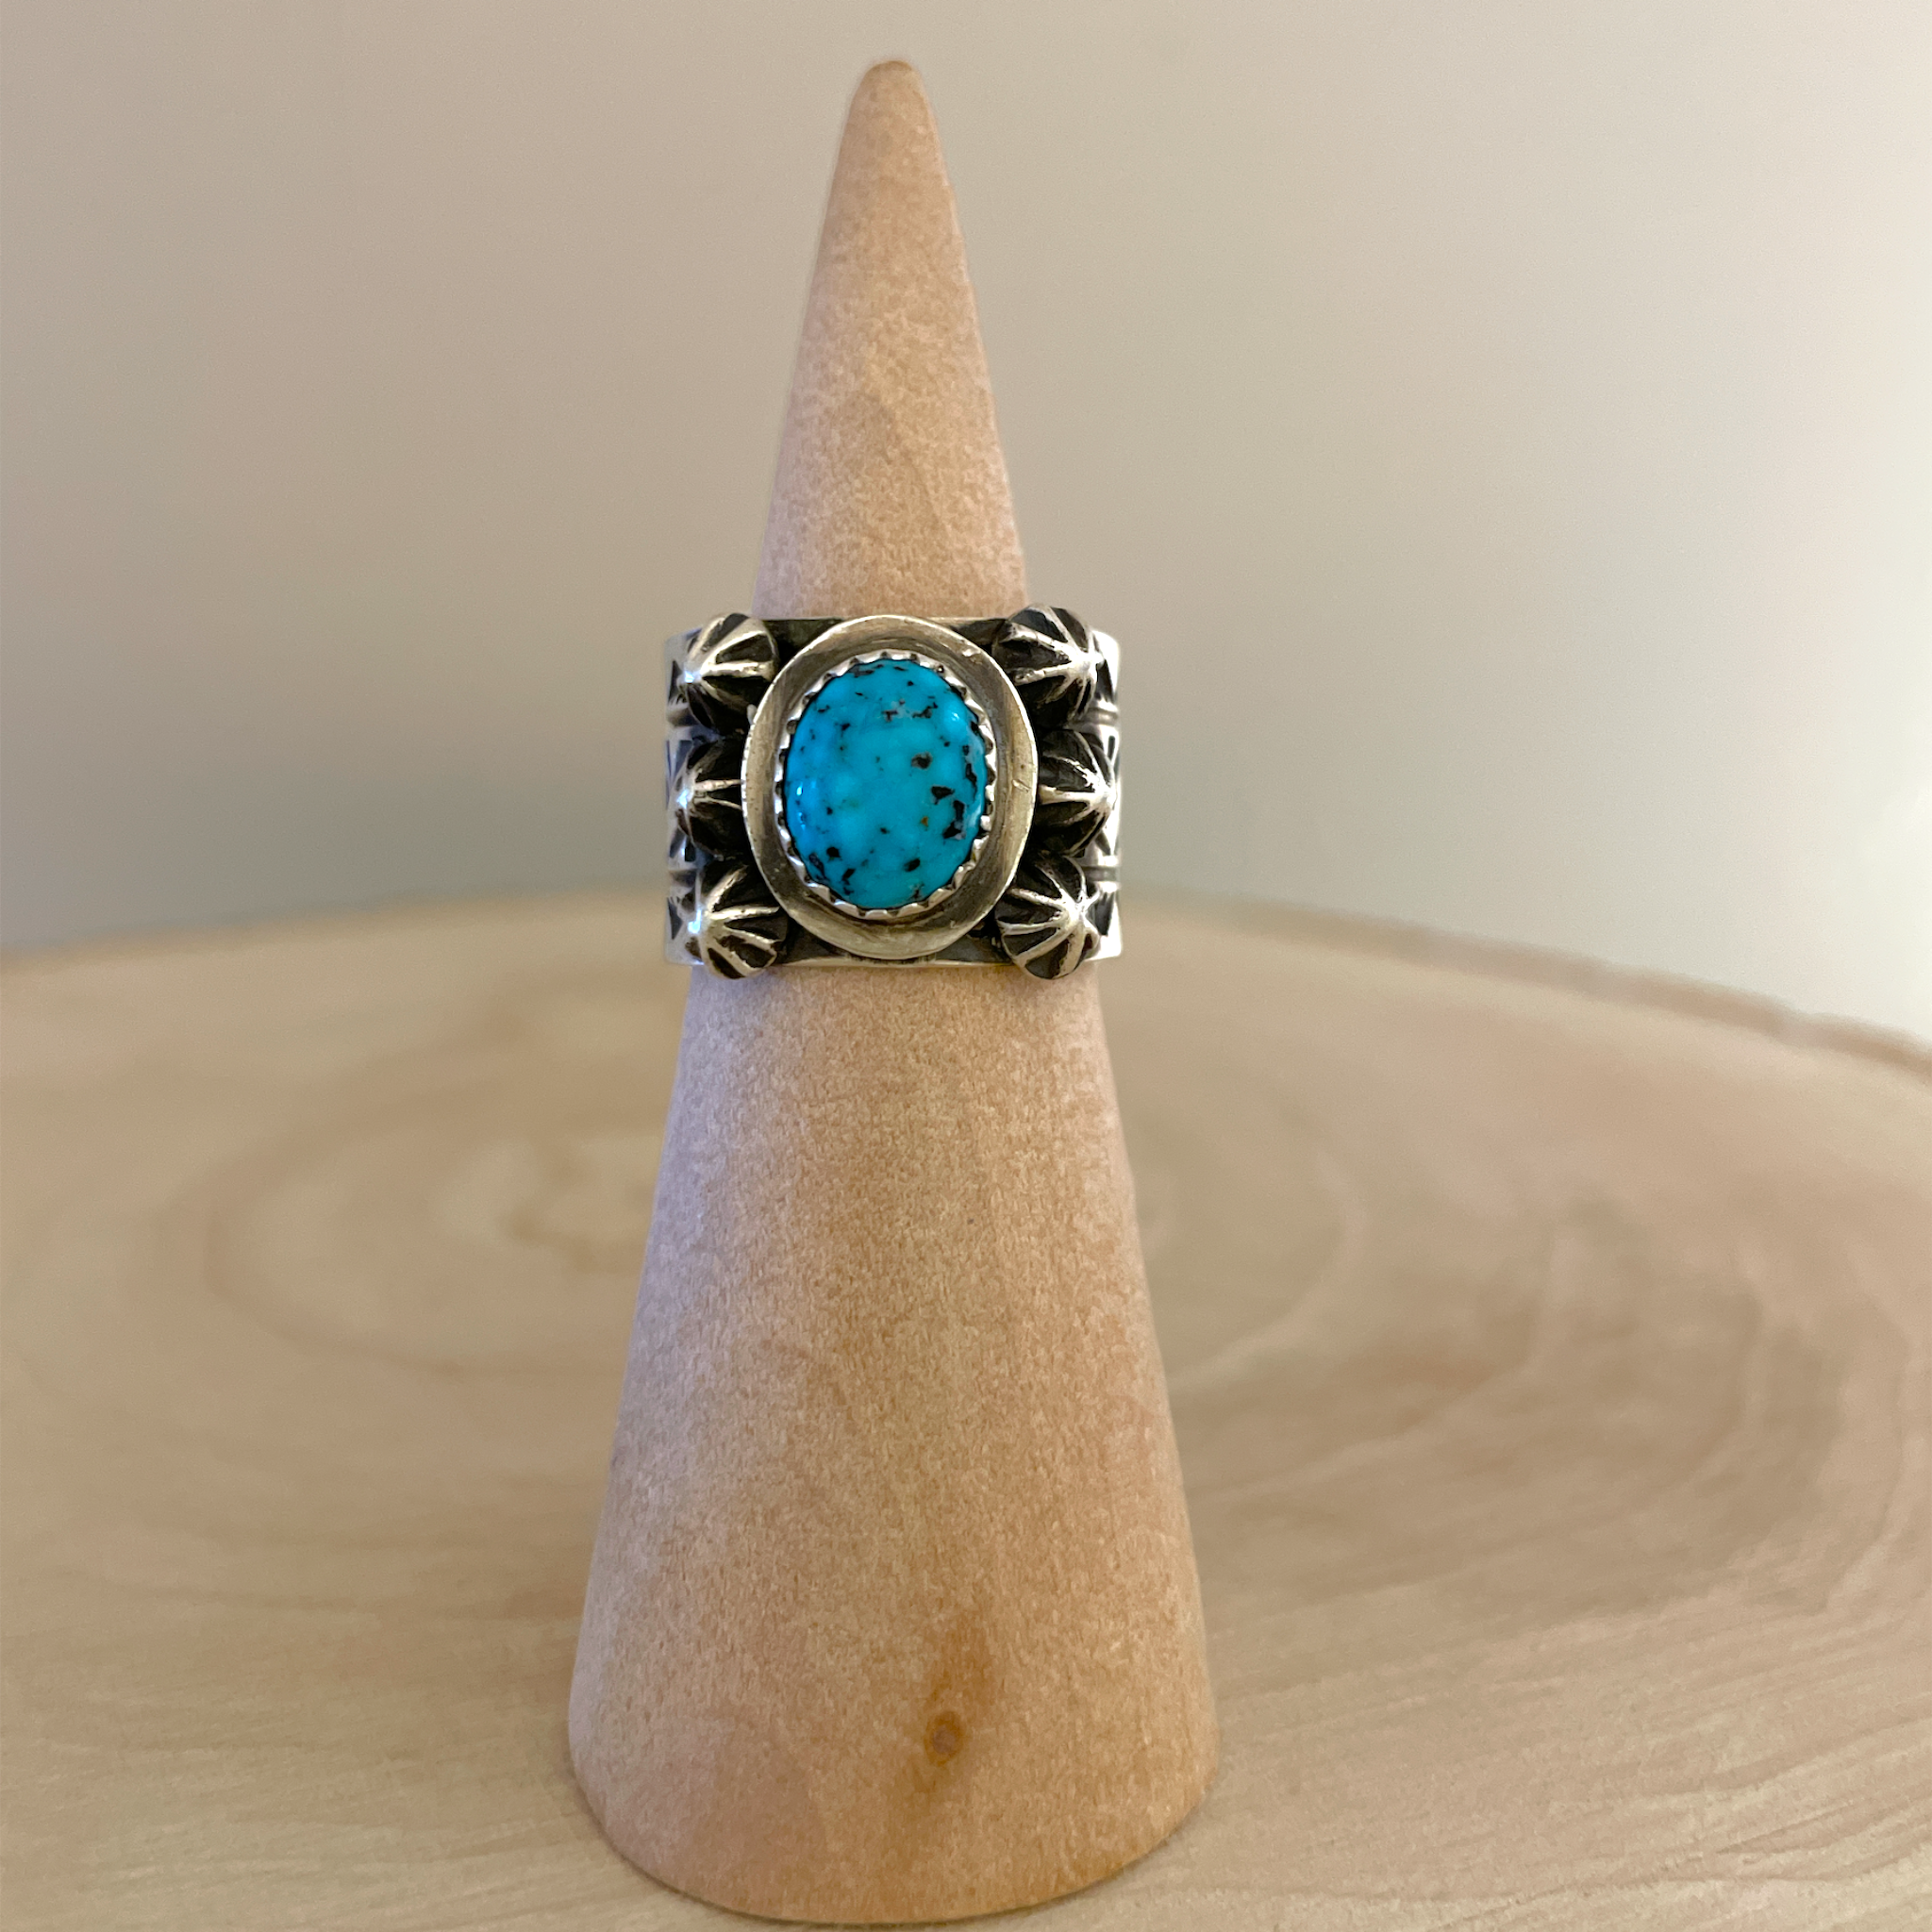 Sold at Auction: ELEVEN SOUTHWEST NATIVE AMERICAN RINGS